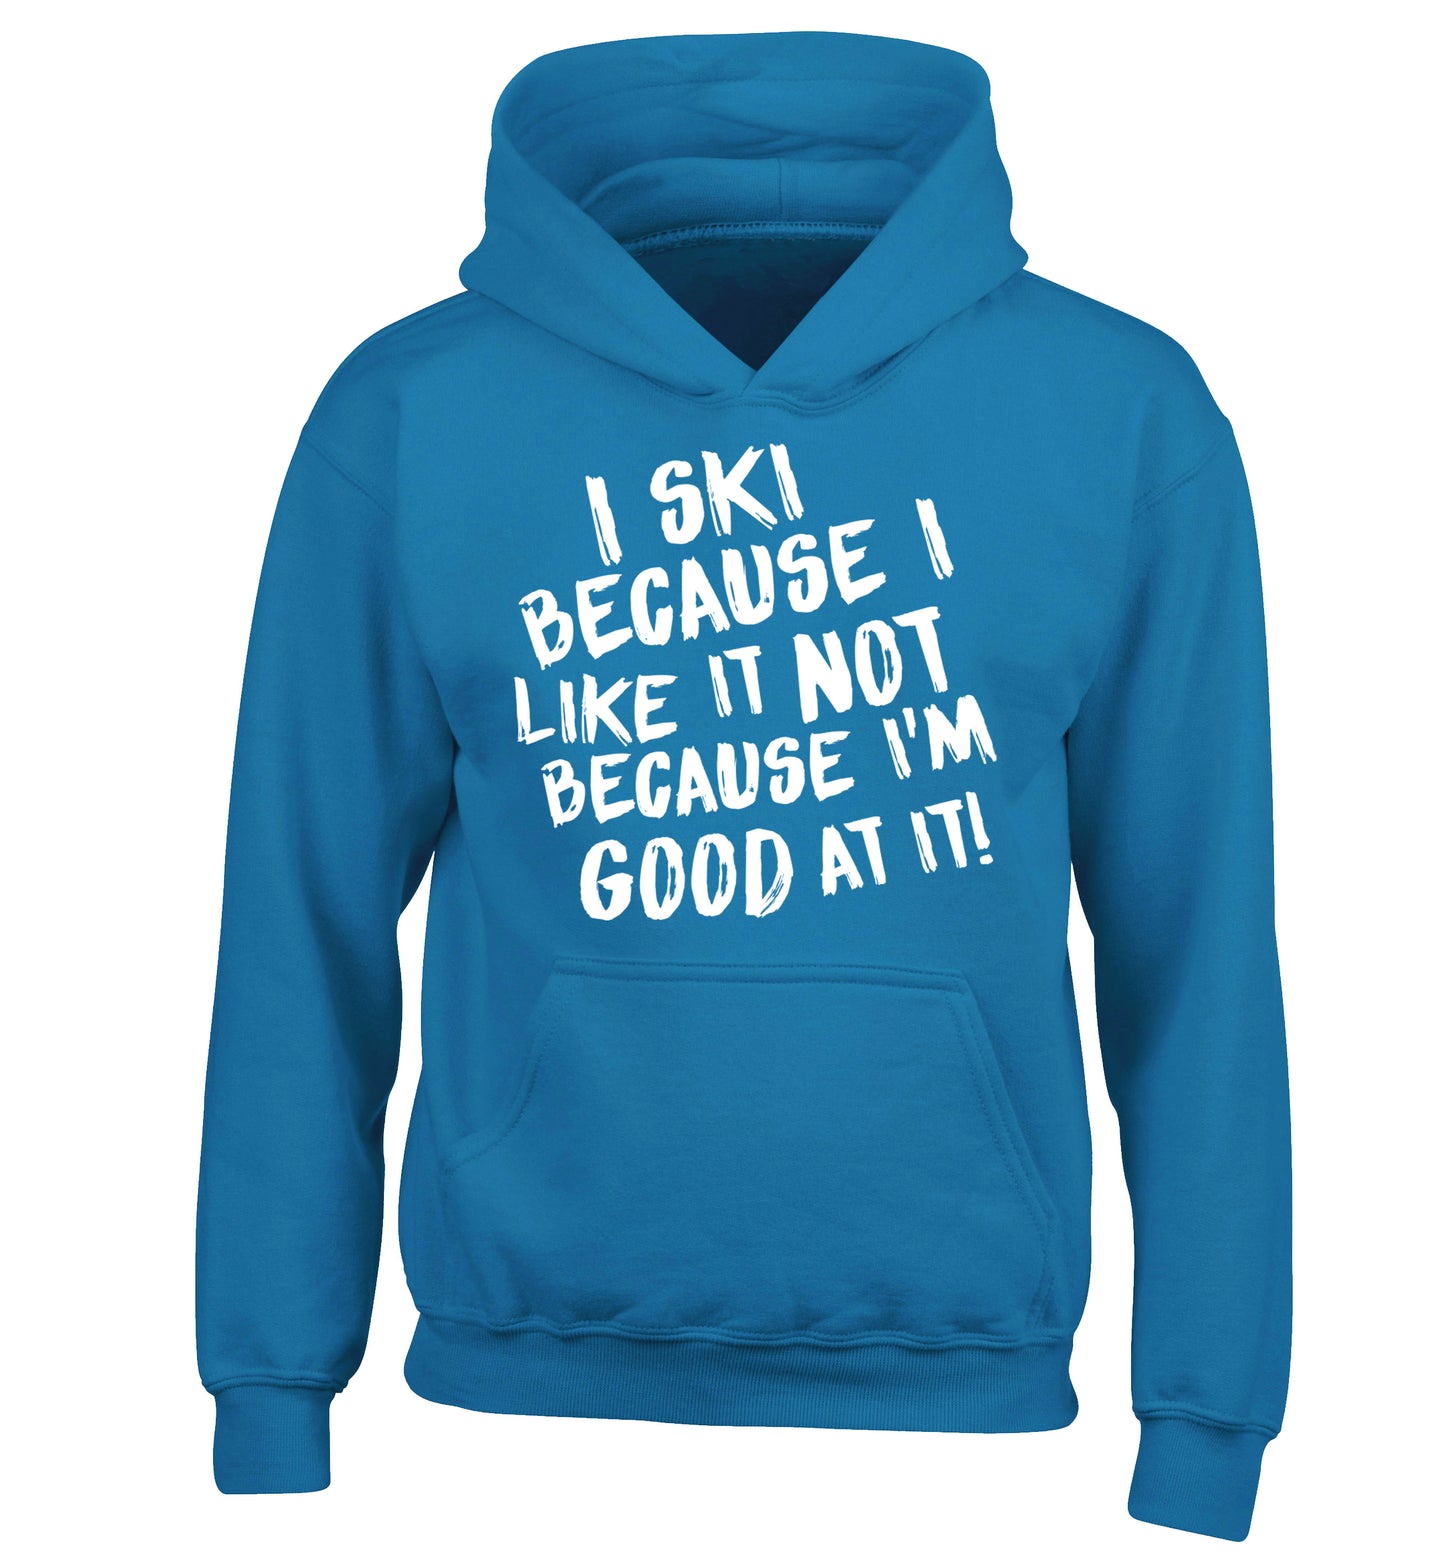 I ski because I like it not because I'm good at it children's blue hoodie 12-14 Years